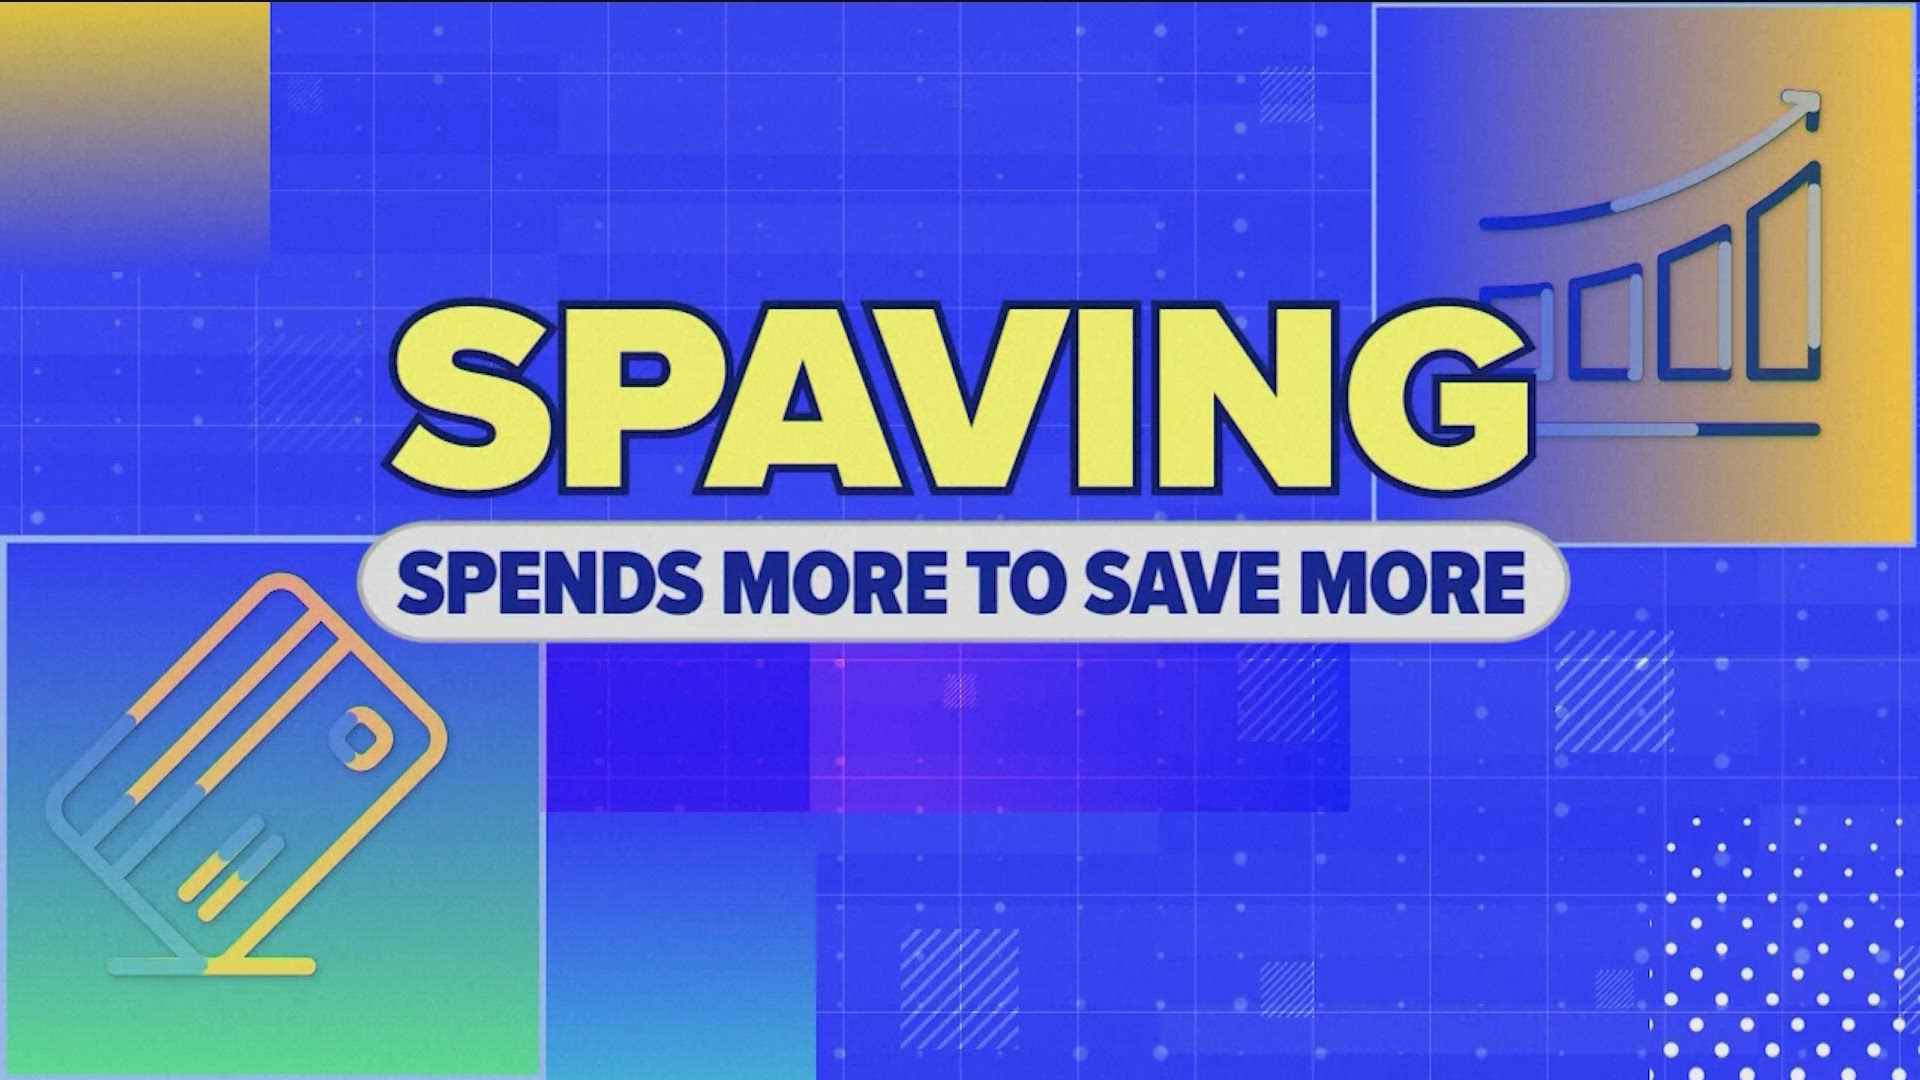 "Spaving" is when a shopper spends more to save more.